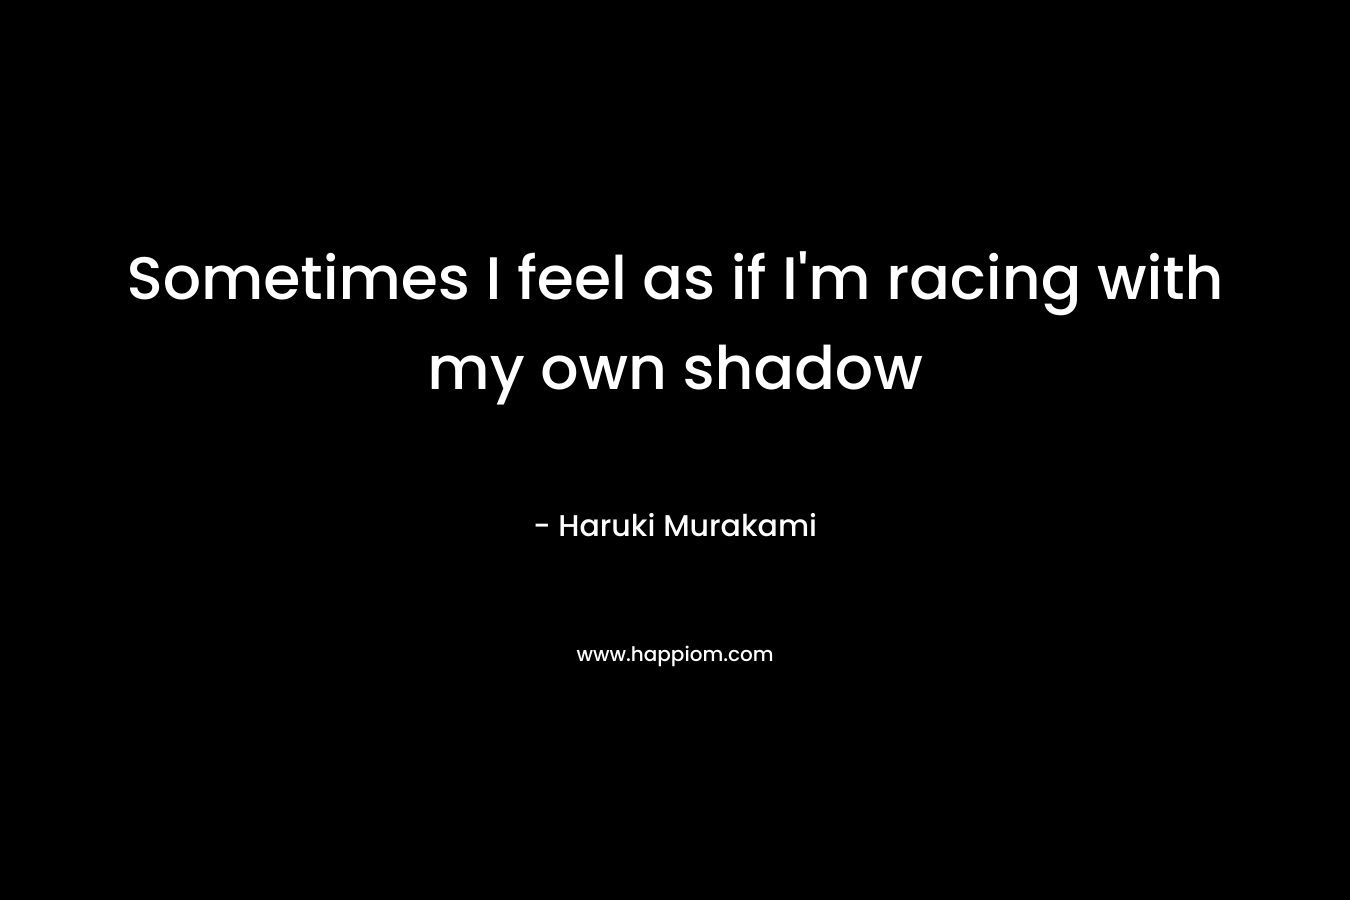 Sometimes I feel as if I'm racing with my own shadow